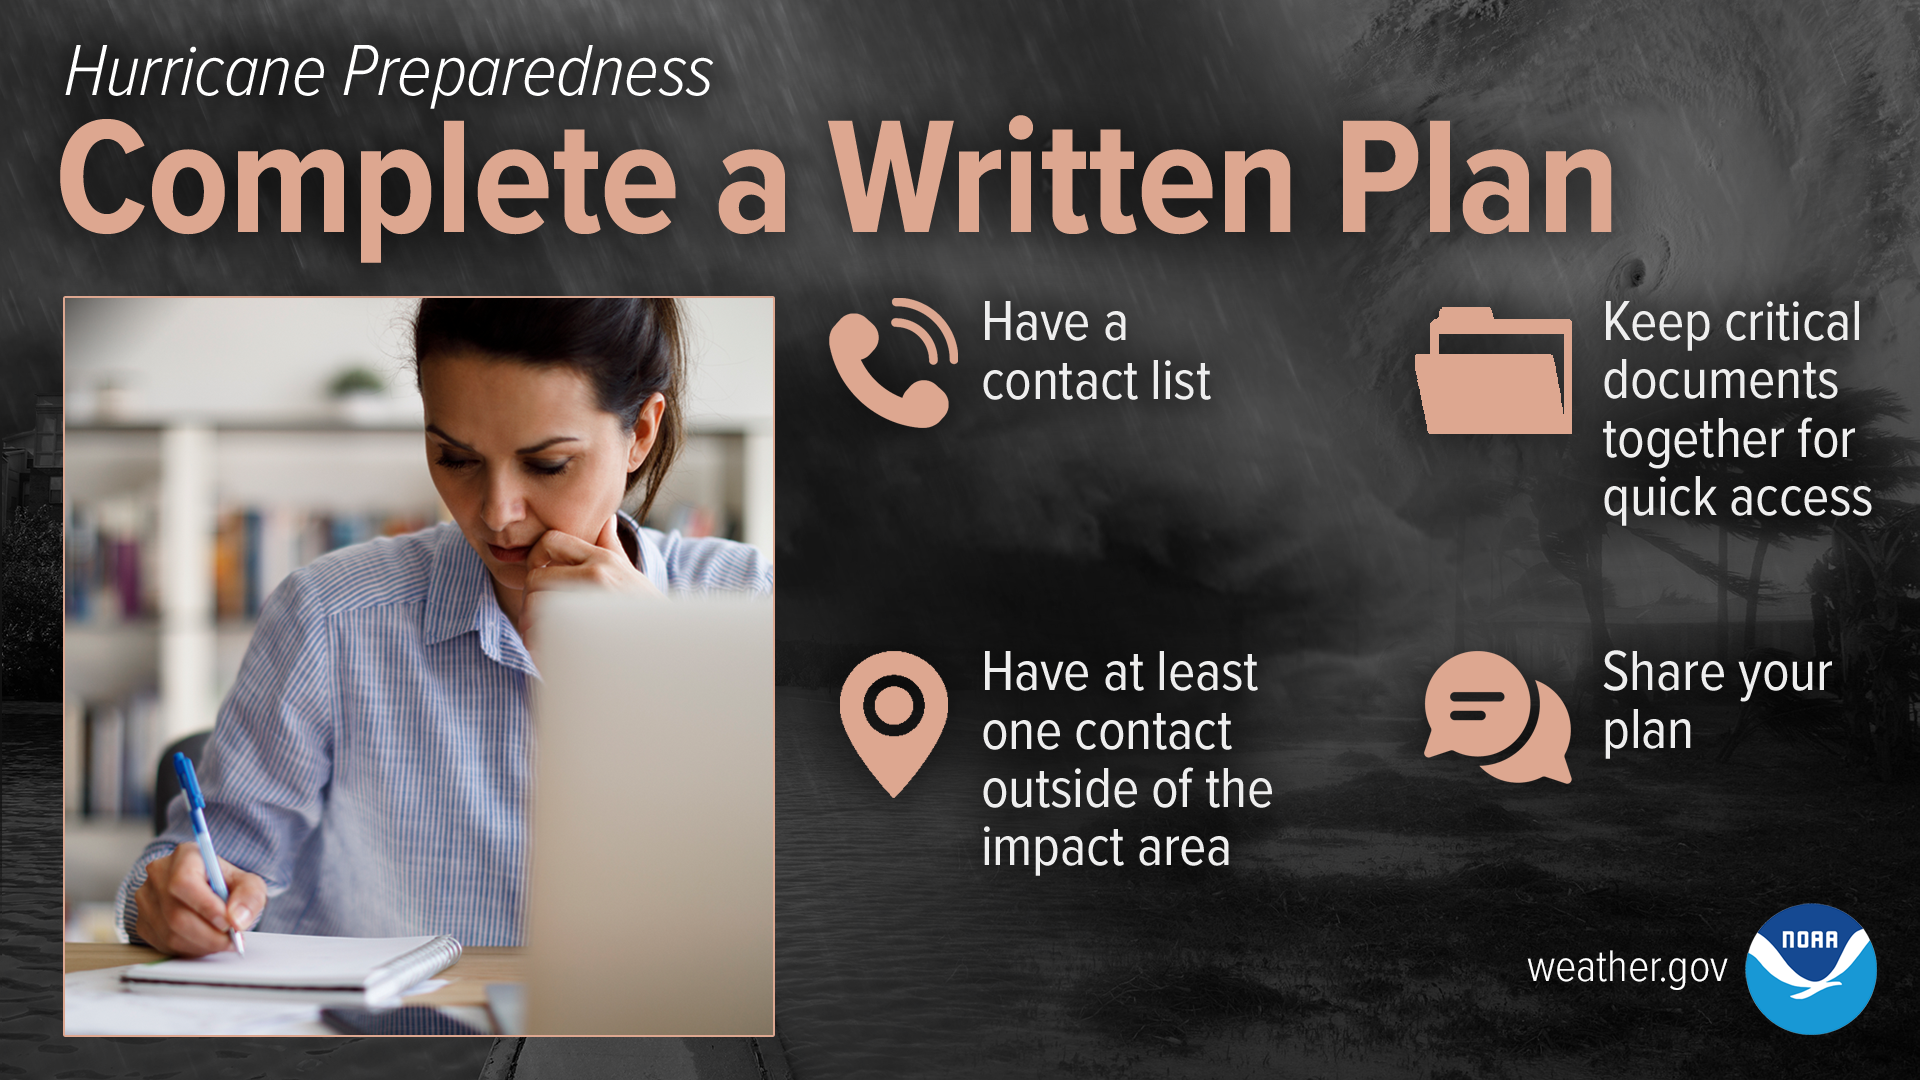 Hurricane Preparedness - Complete a Written Plan. Have a contact list. Keep critical documents together for quick access. Have at least one contact outside of the impact area. Share your plan.